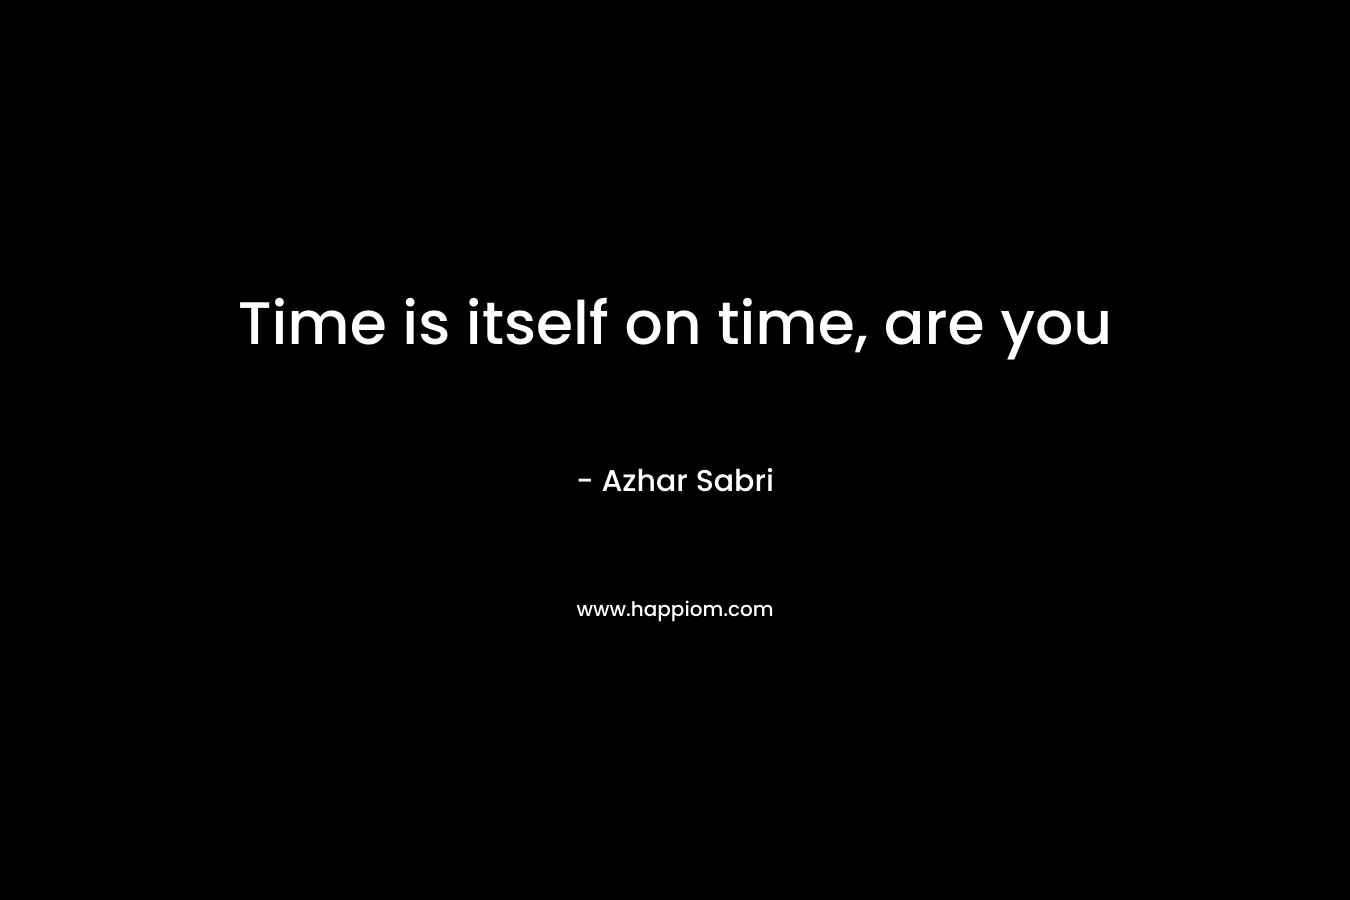 Time is itself on time, are you